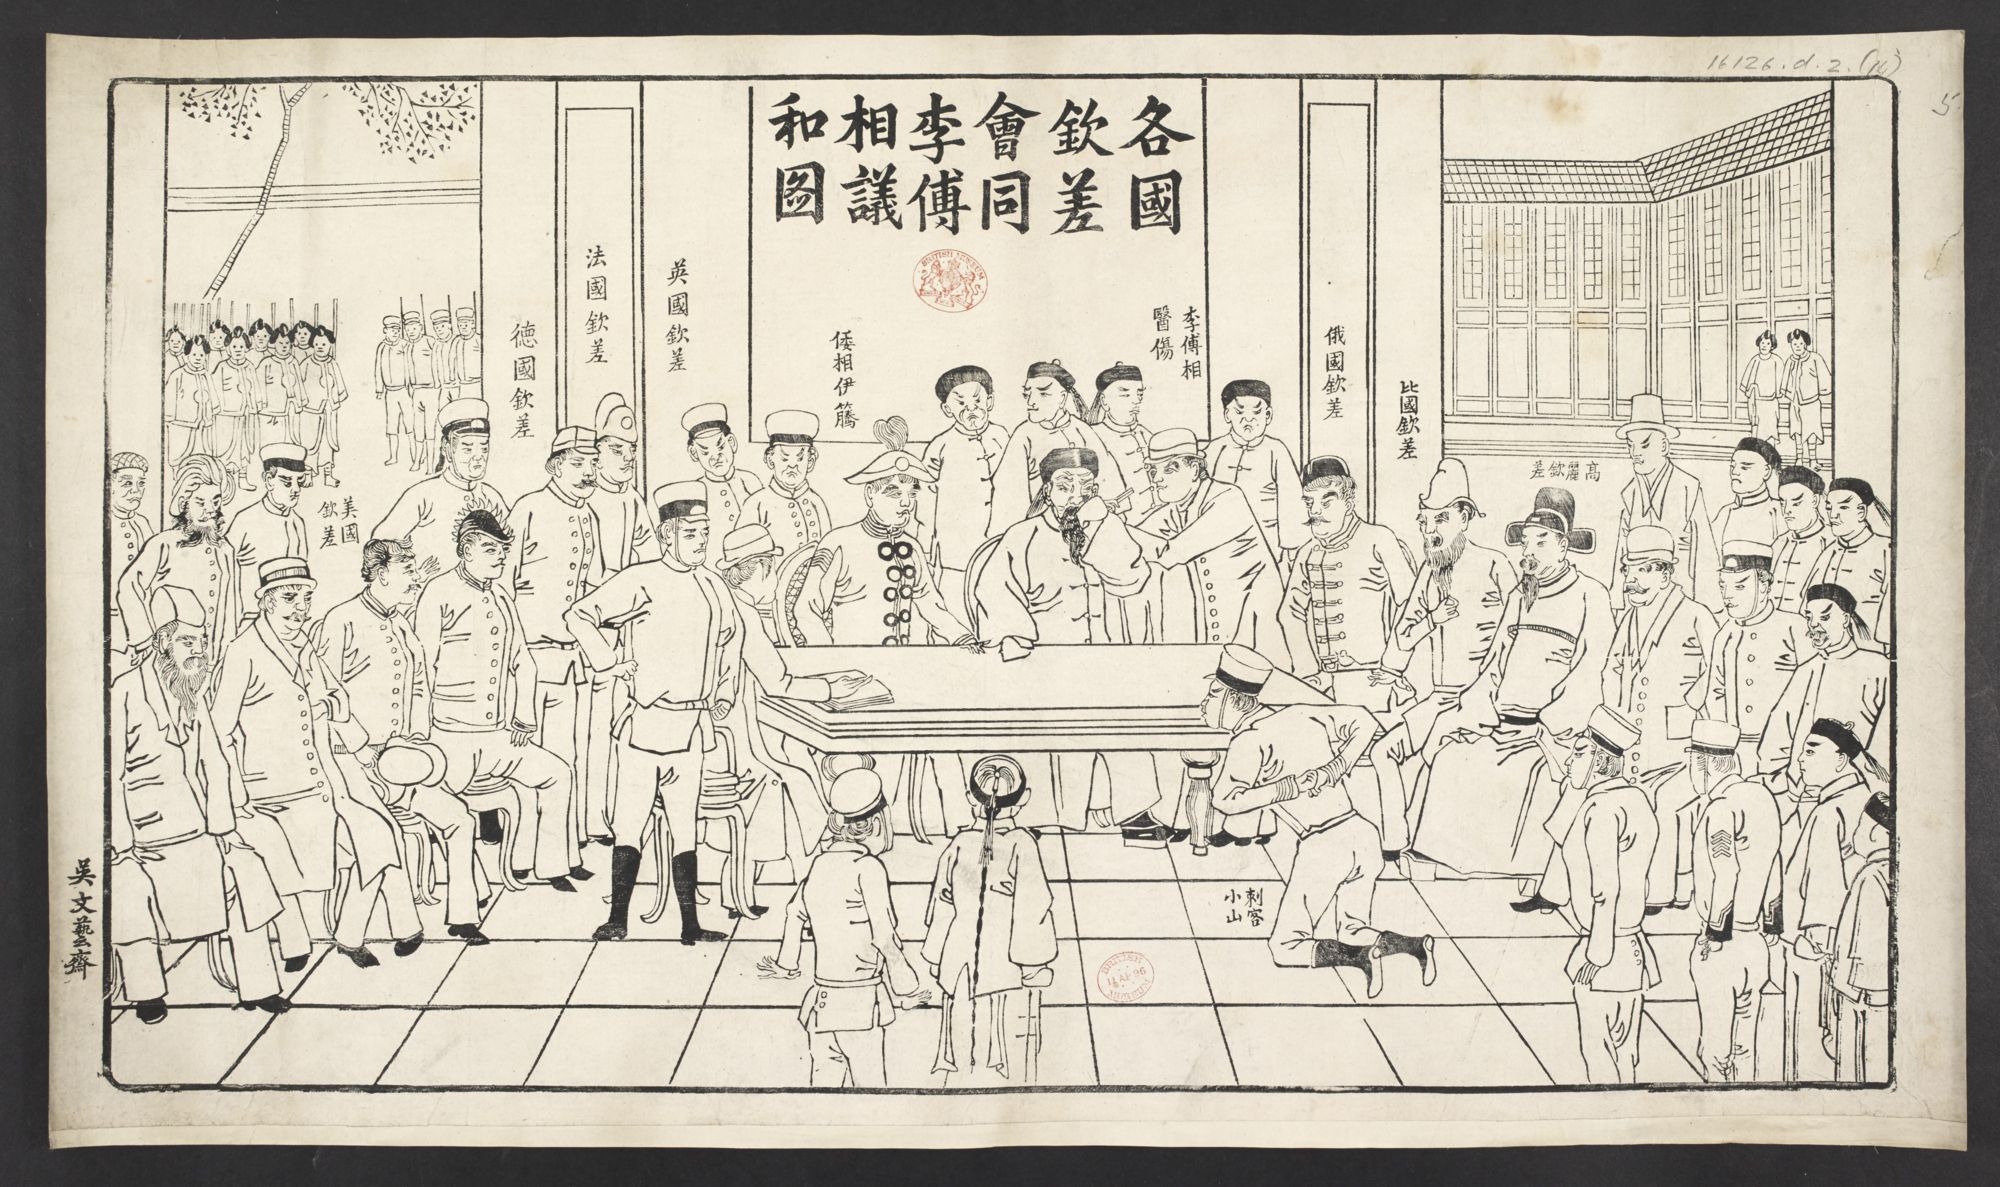 Foreign countries negotiating peace with the Imperial Commissioner Li Fuxiang [Li Hongzhang]